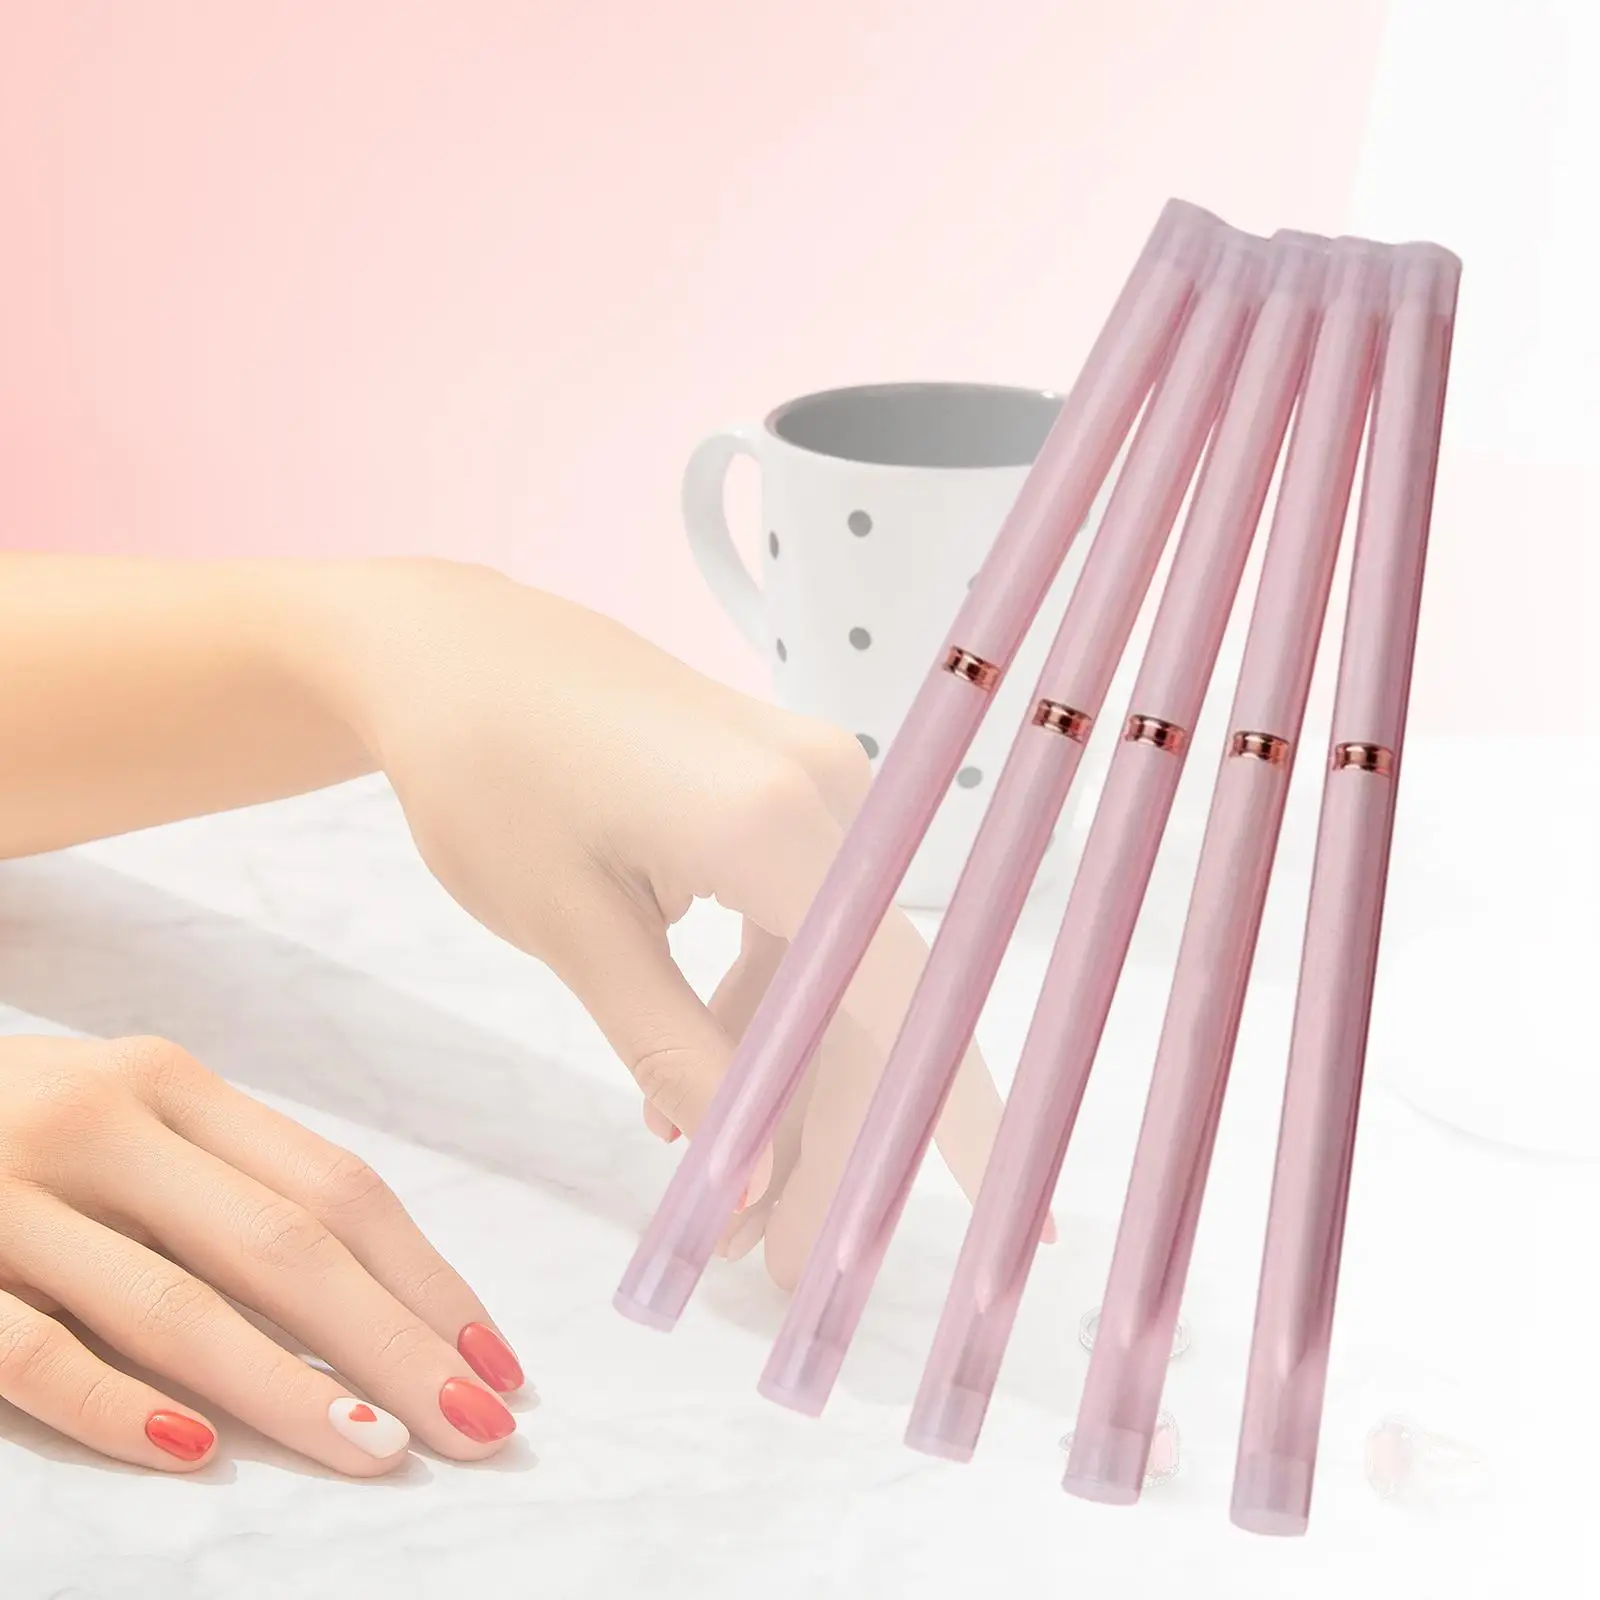 5x Nail Art Brushes Set for Nail Art Fine Designs Pulling Lines Thin Details